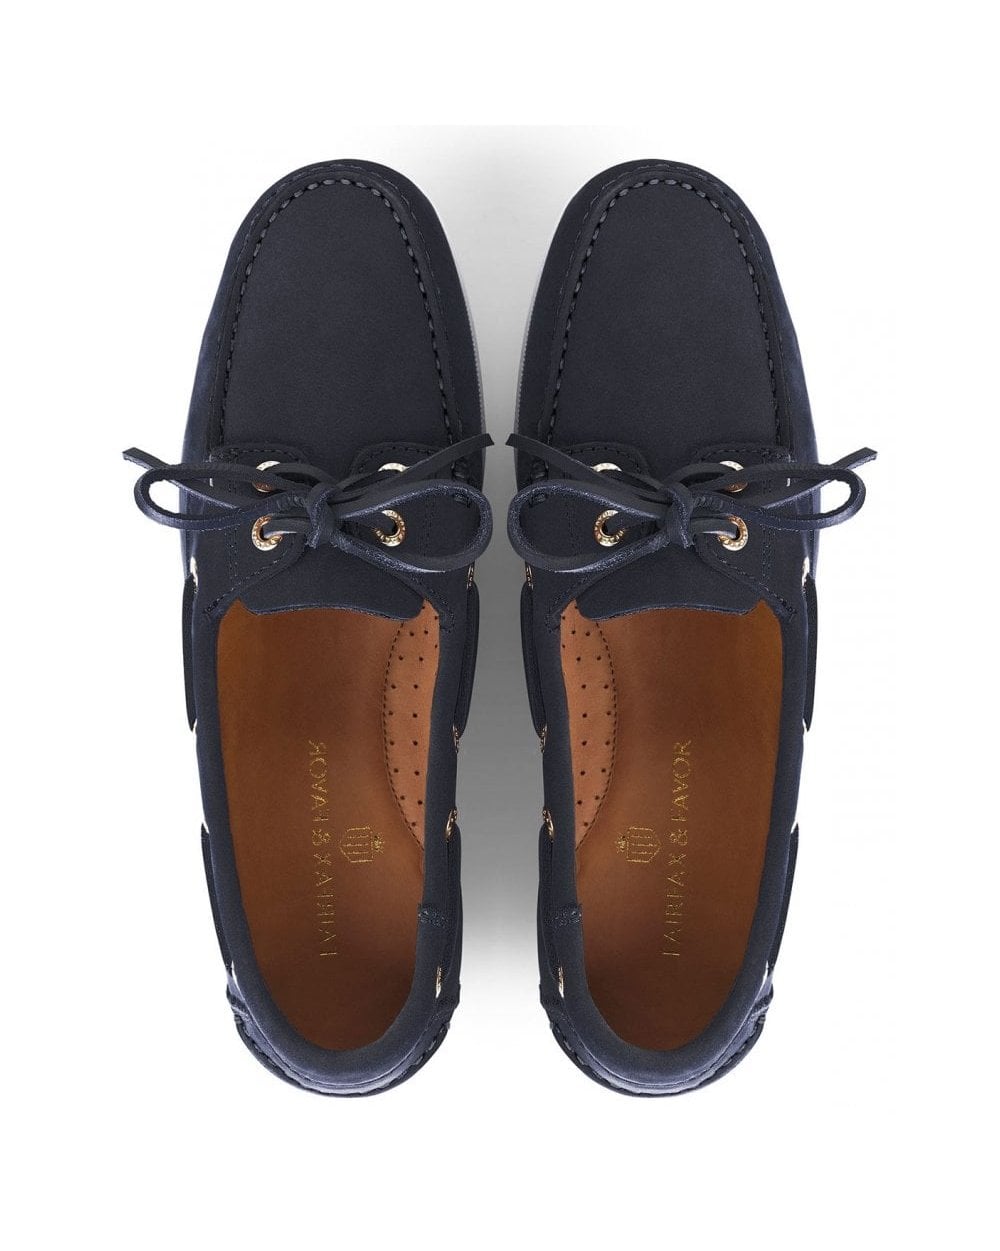 Salcombe Deck Shoes